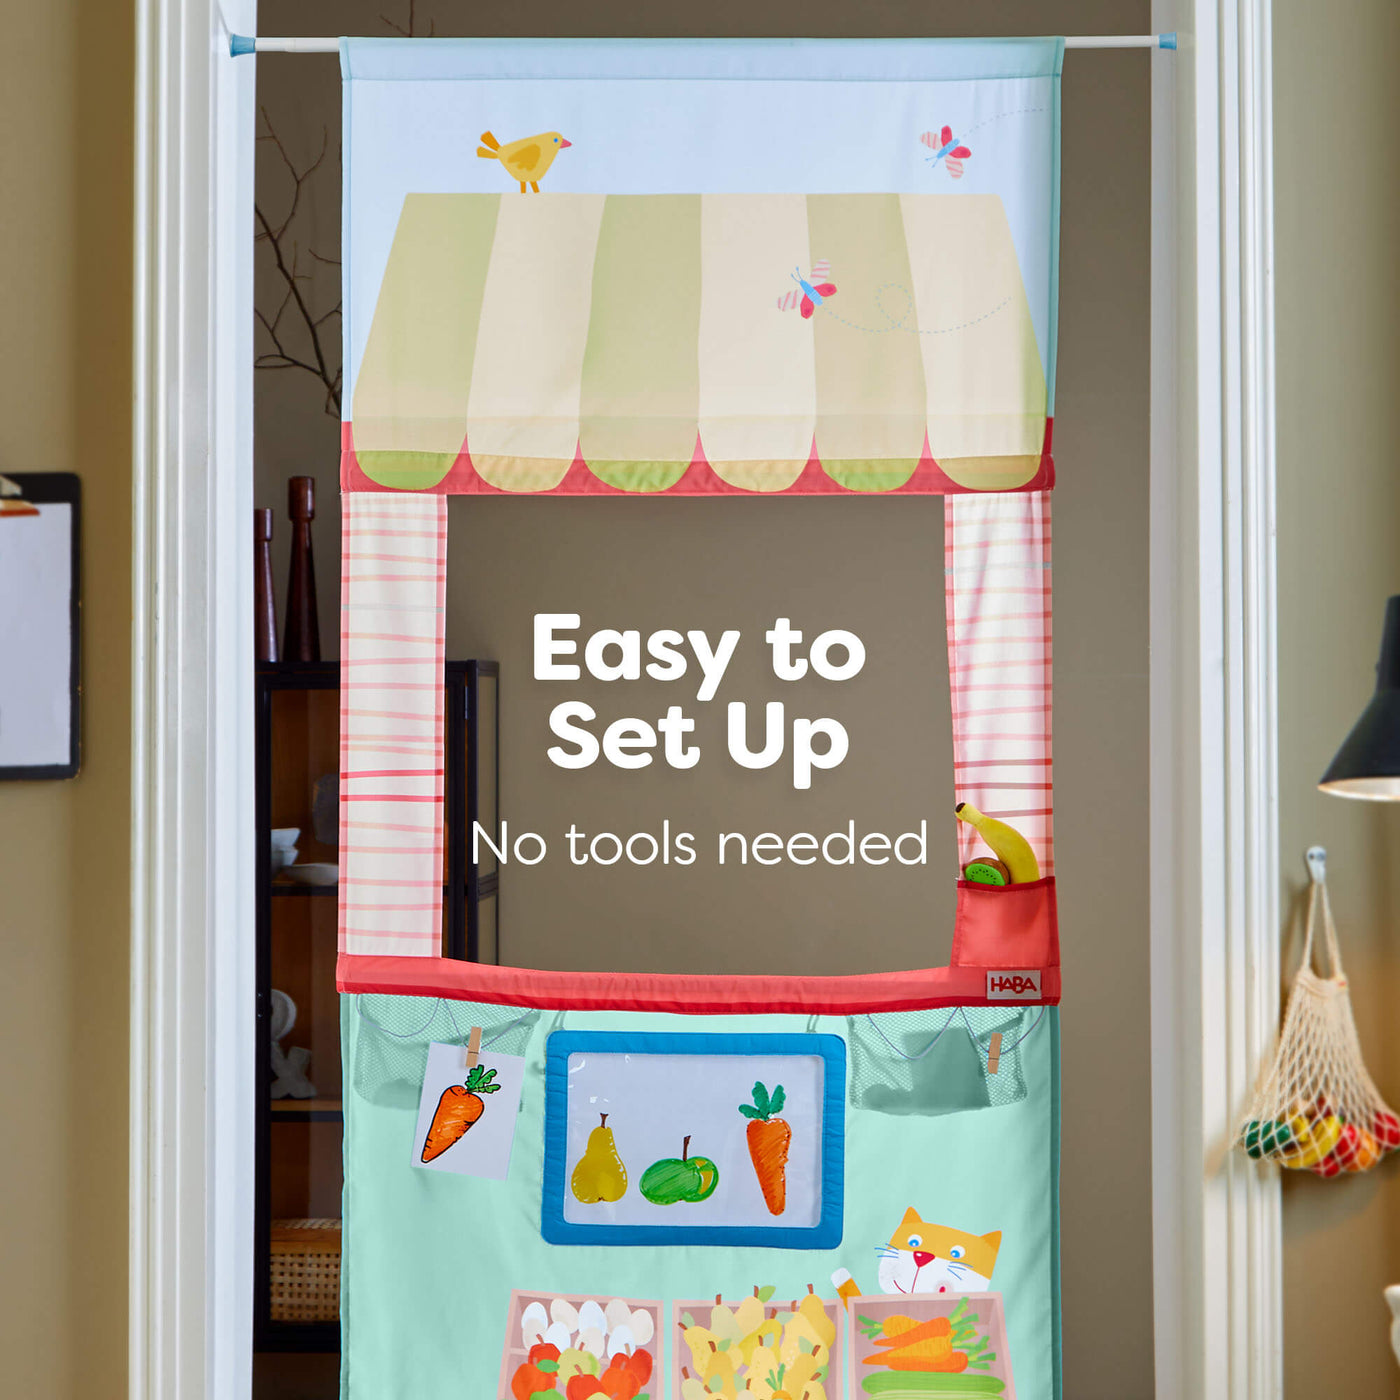 HABA Hanging Doorway Play Store is easy to set up, no tools needed